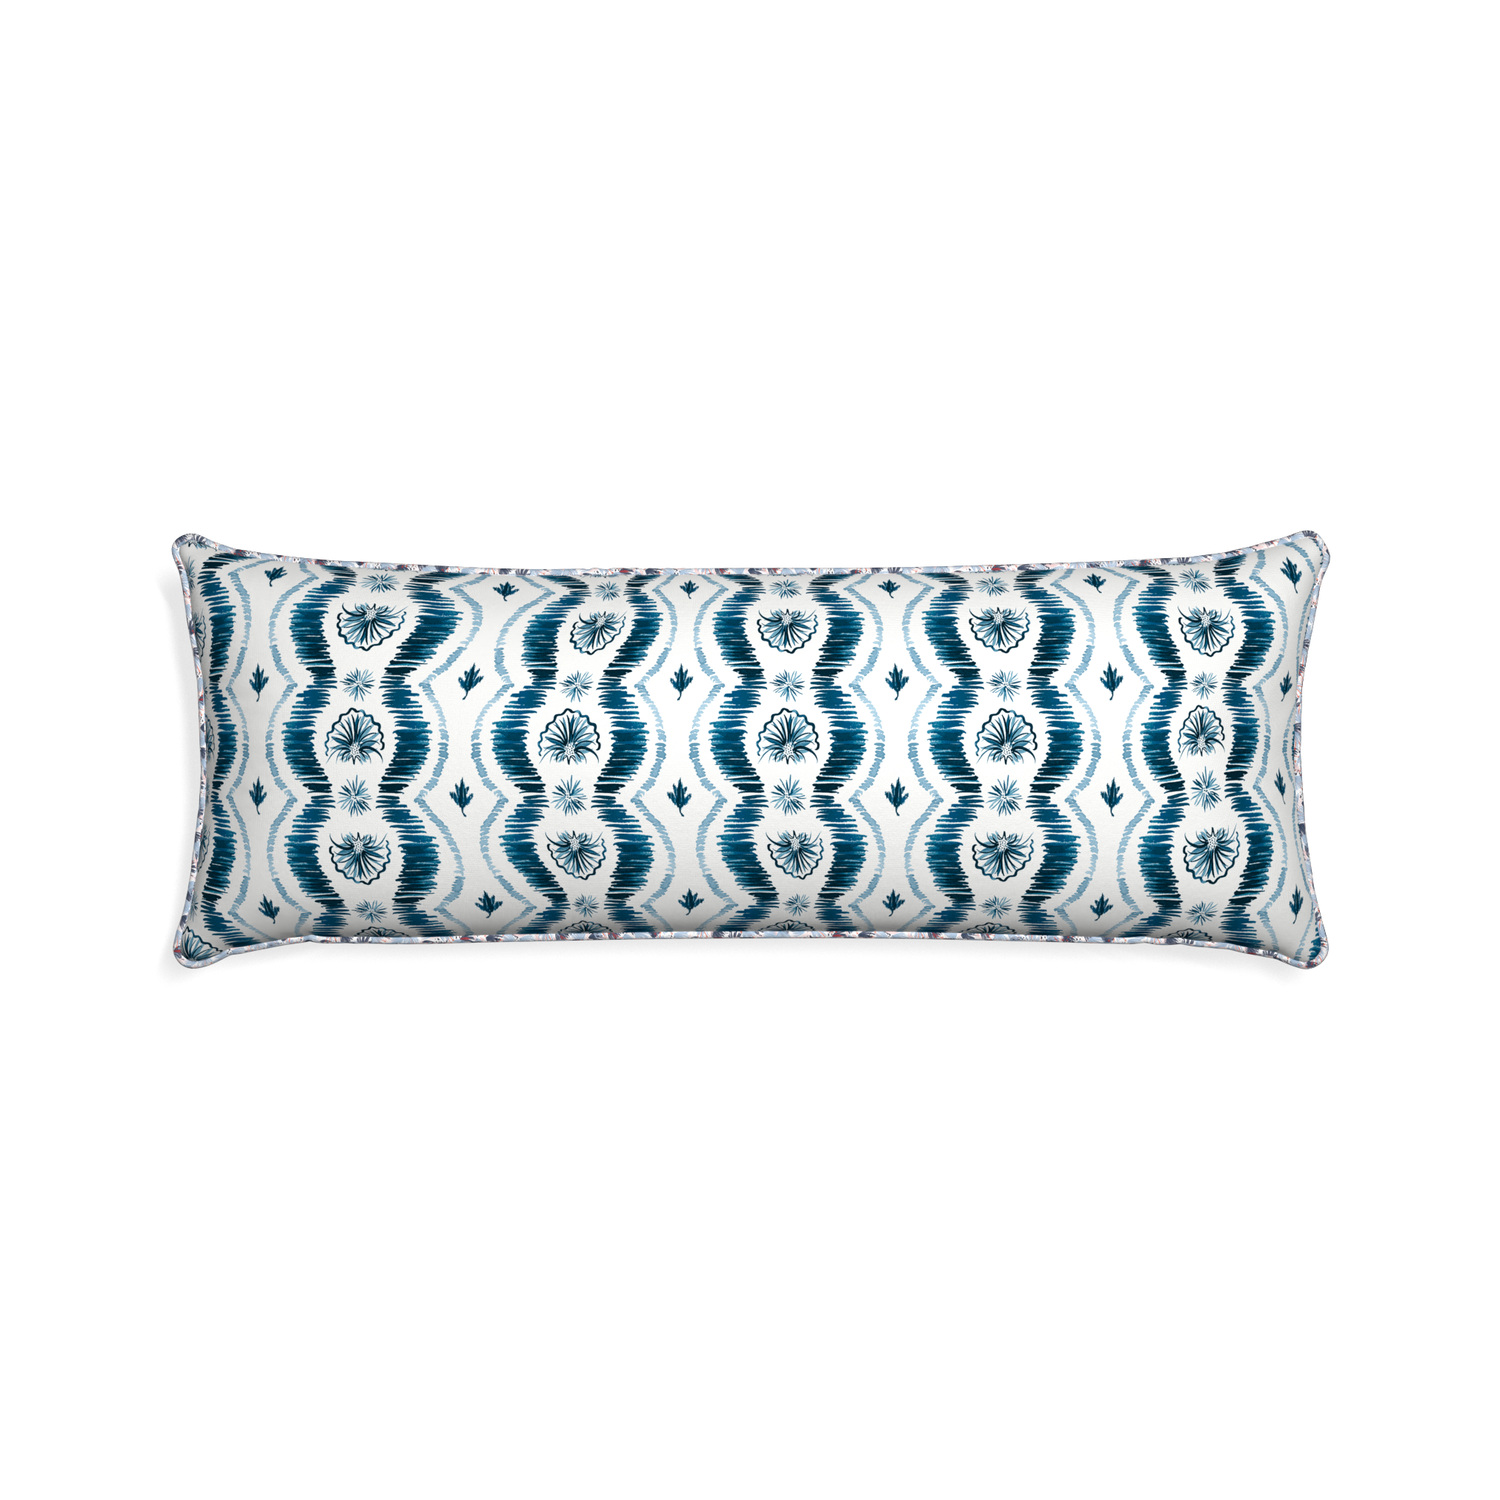 Xl-lumbar alice custom blue ikatpillow with e piping on white background